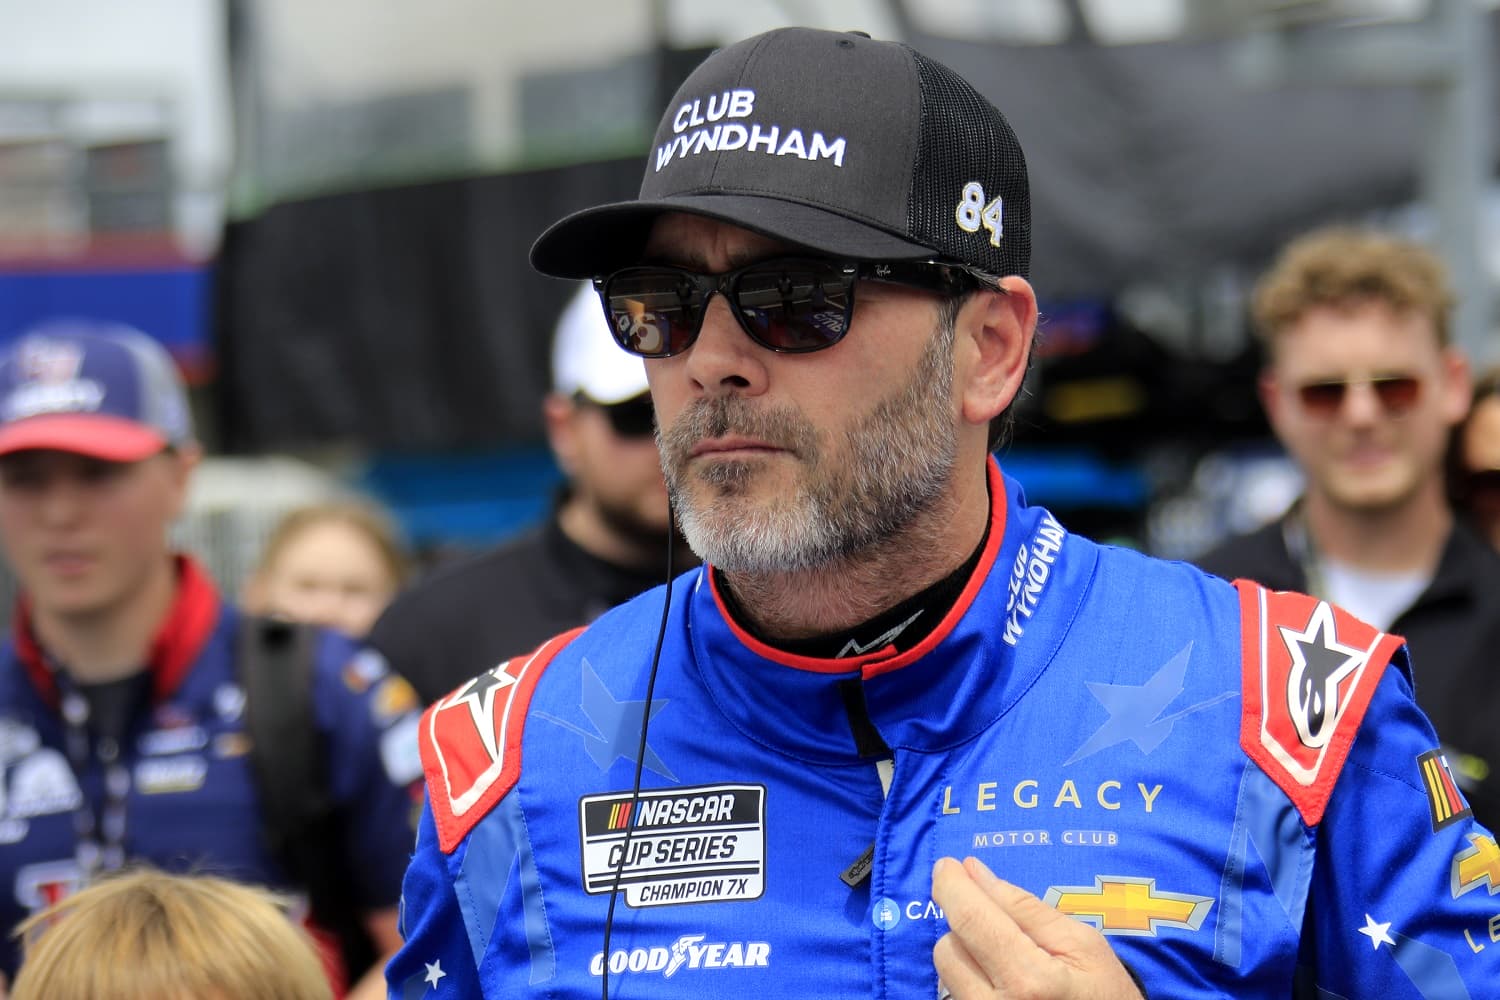 Jimmie Johnson talks with members of his crew prior to the NASCAR Cup Series Coca-Cola 600 on May 29, 2023 at Charlotte Motor Speedway. | Jeff Robinson/Icon Sportswire via Getty Images